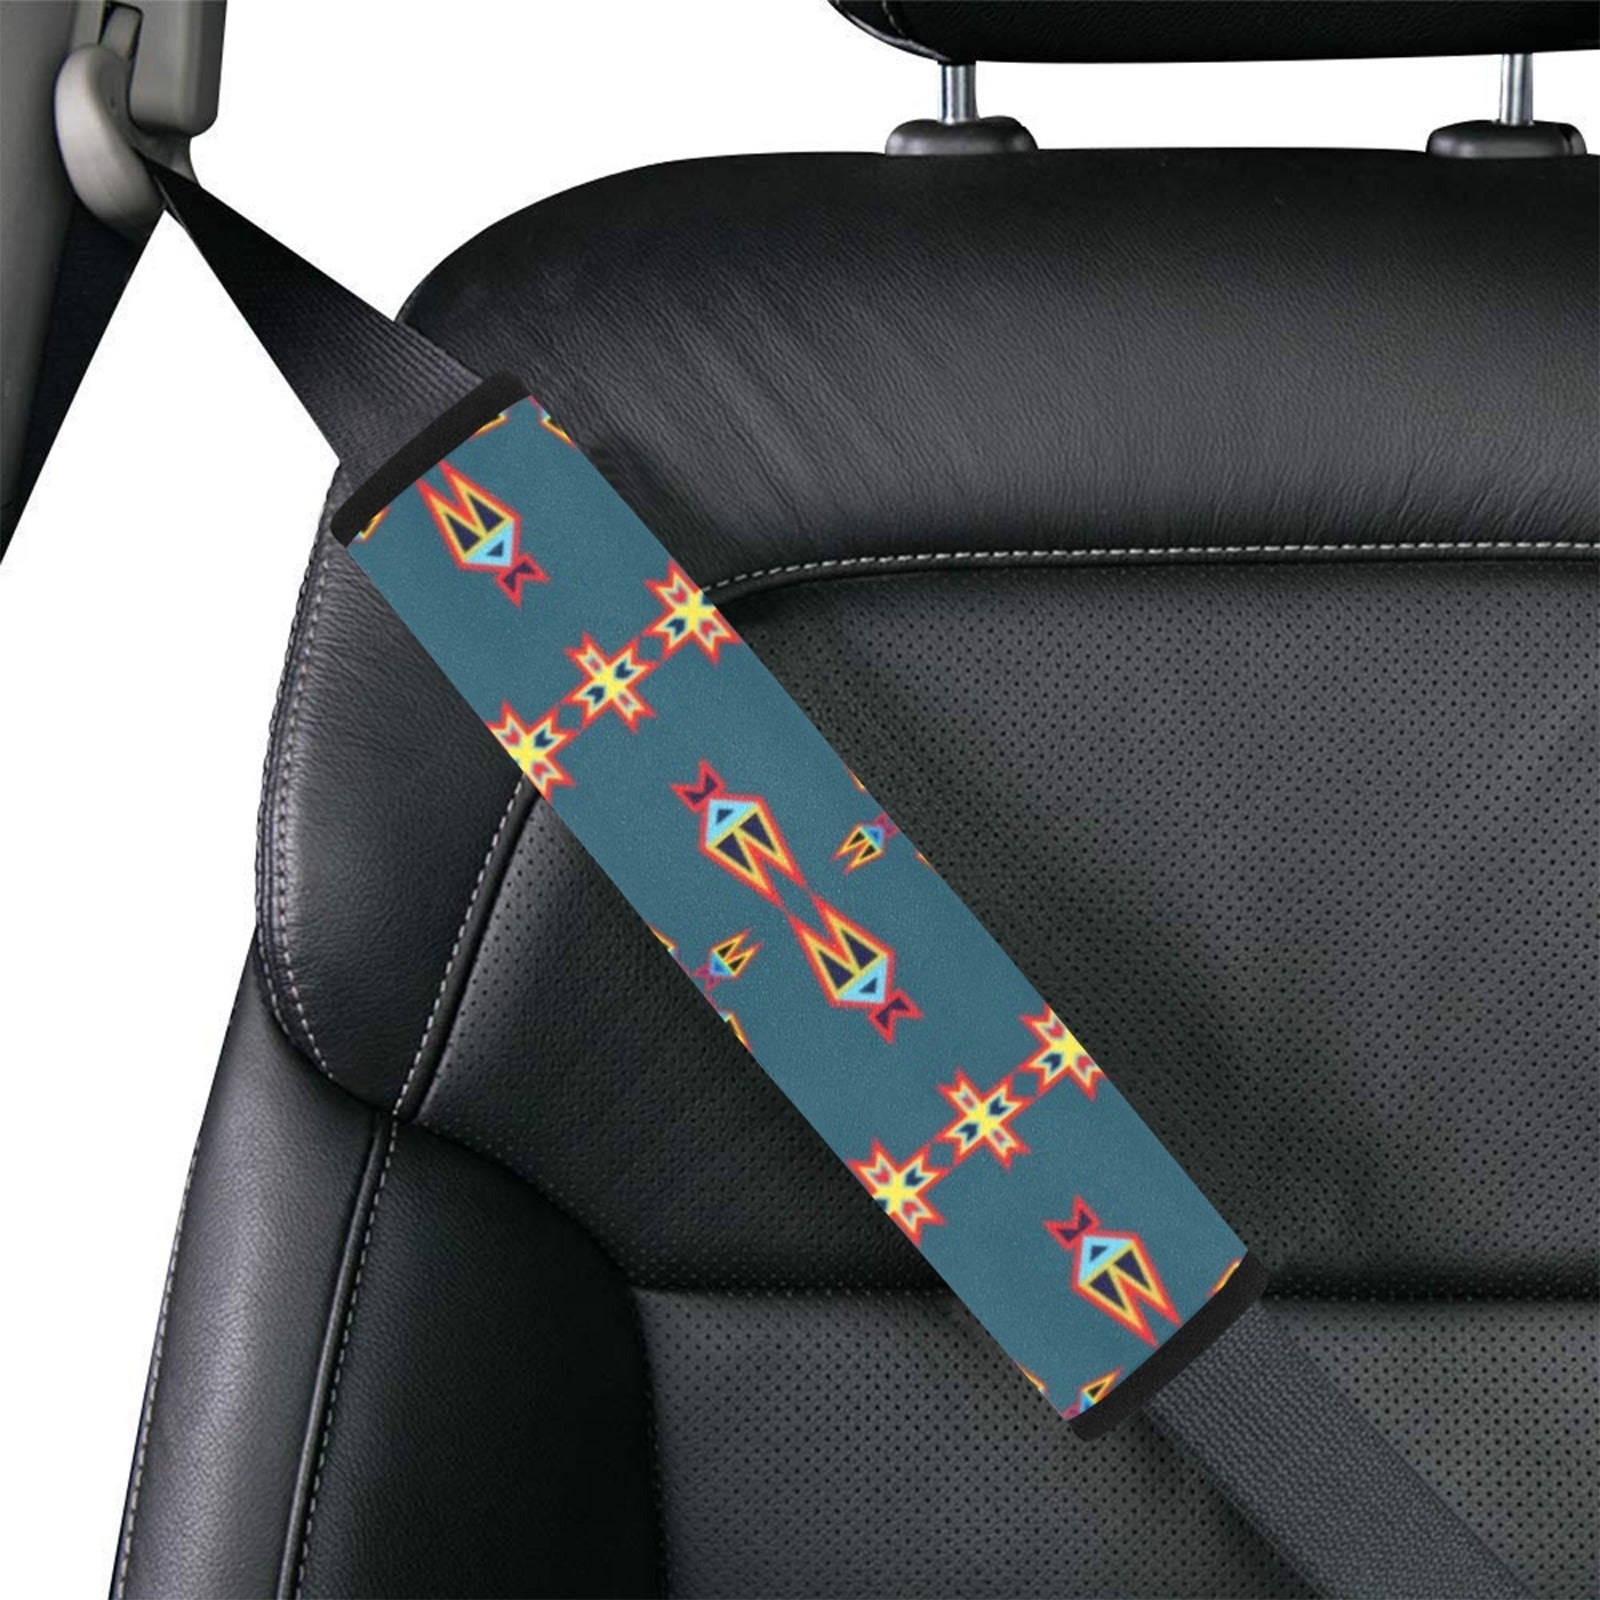 Four Directions Lodges Ocean Car Seat Belt Cover 7''x12.6'' (Pack of 2)